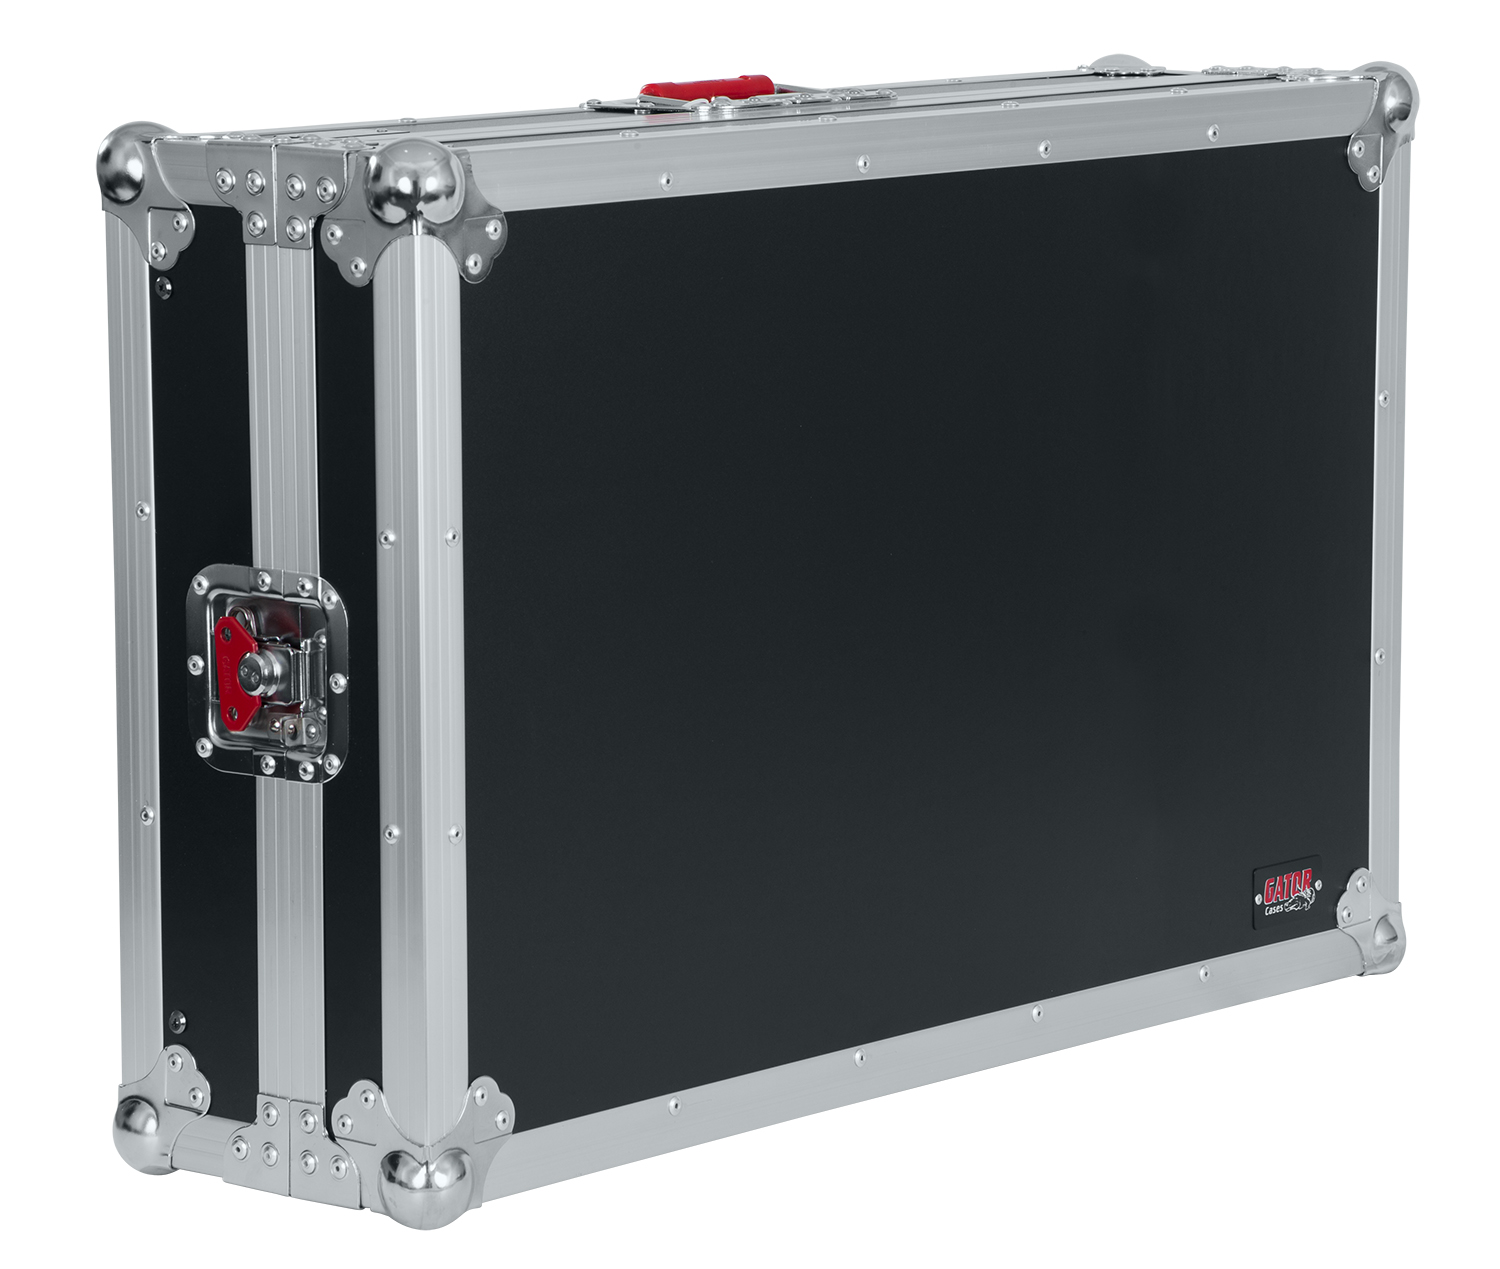 G-TOUR DSP case for large sized DJ controllers